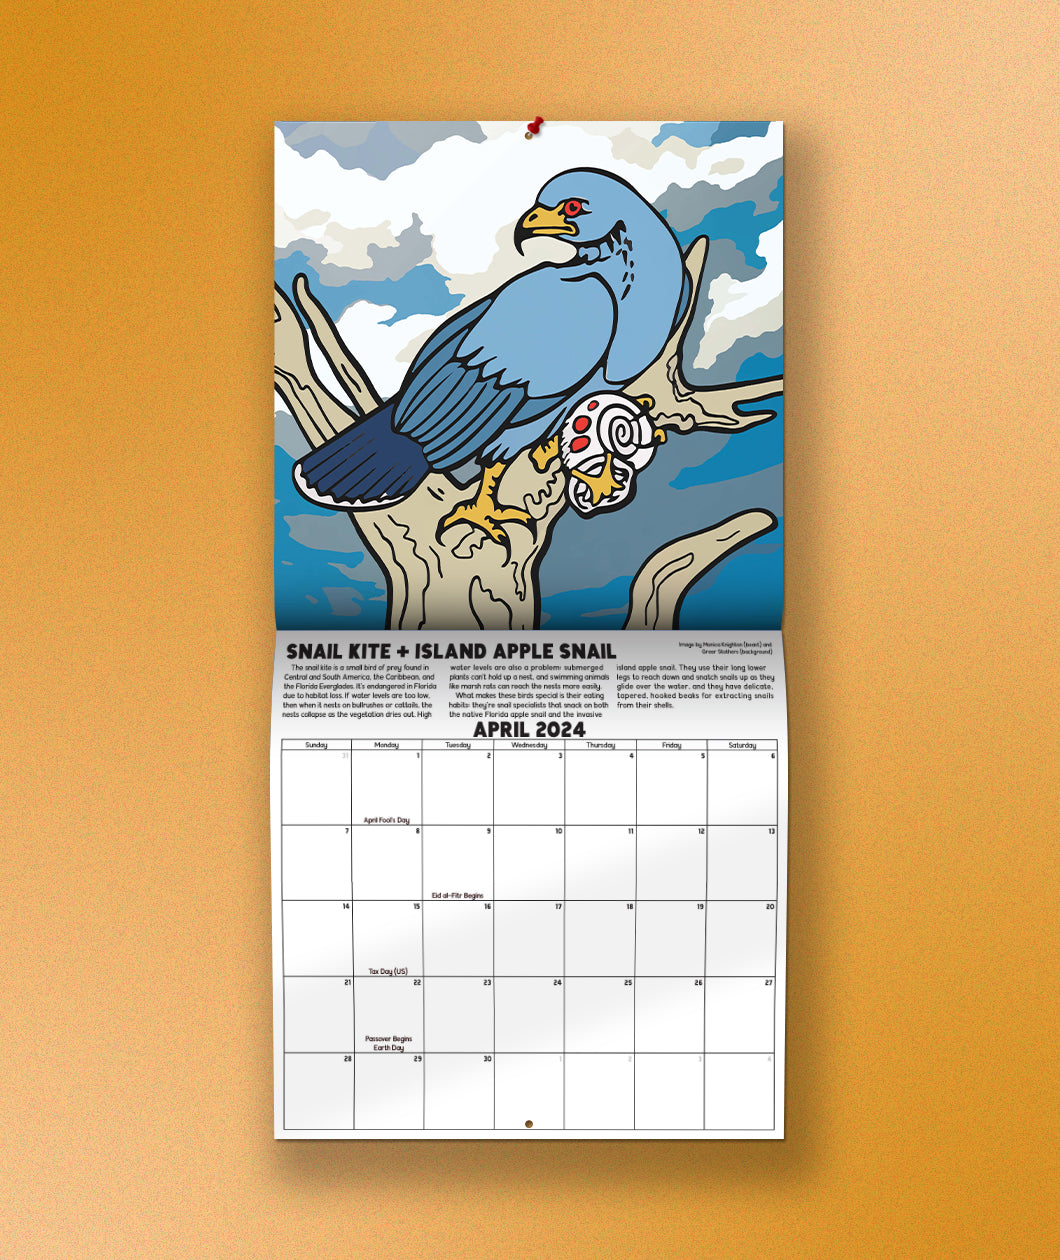 The April page of the Bizarre Beasts 2024 Calendar in front of a yellow background. The picture is a colorful illustration of a snail kite bird holding an island apple snail in a tree. 